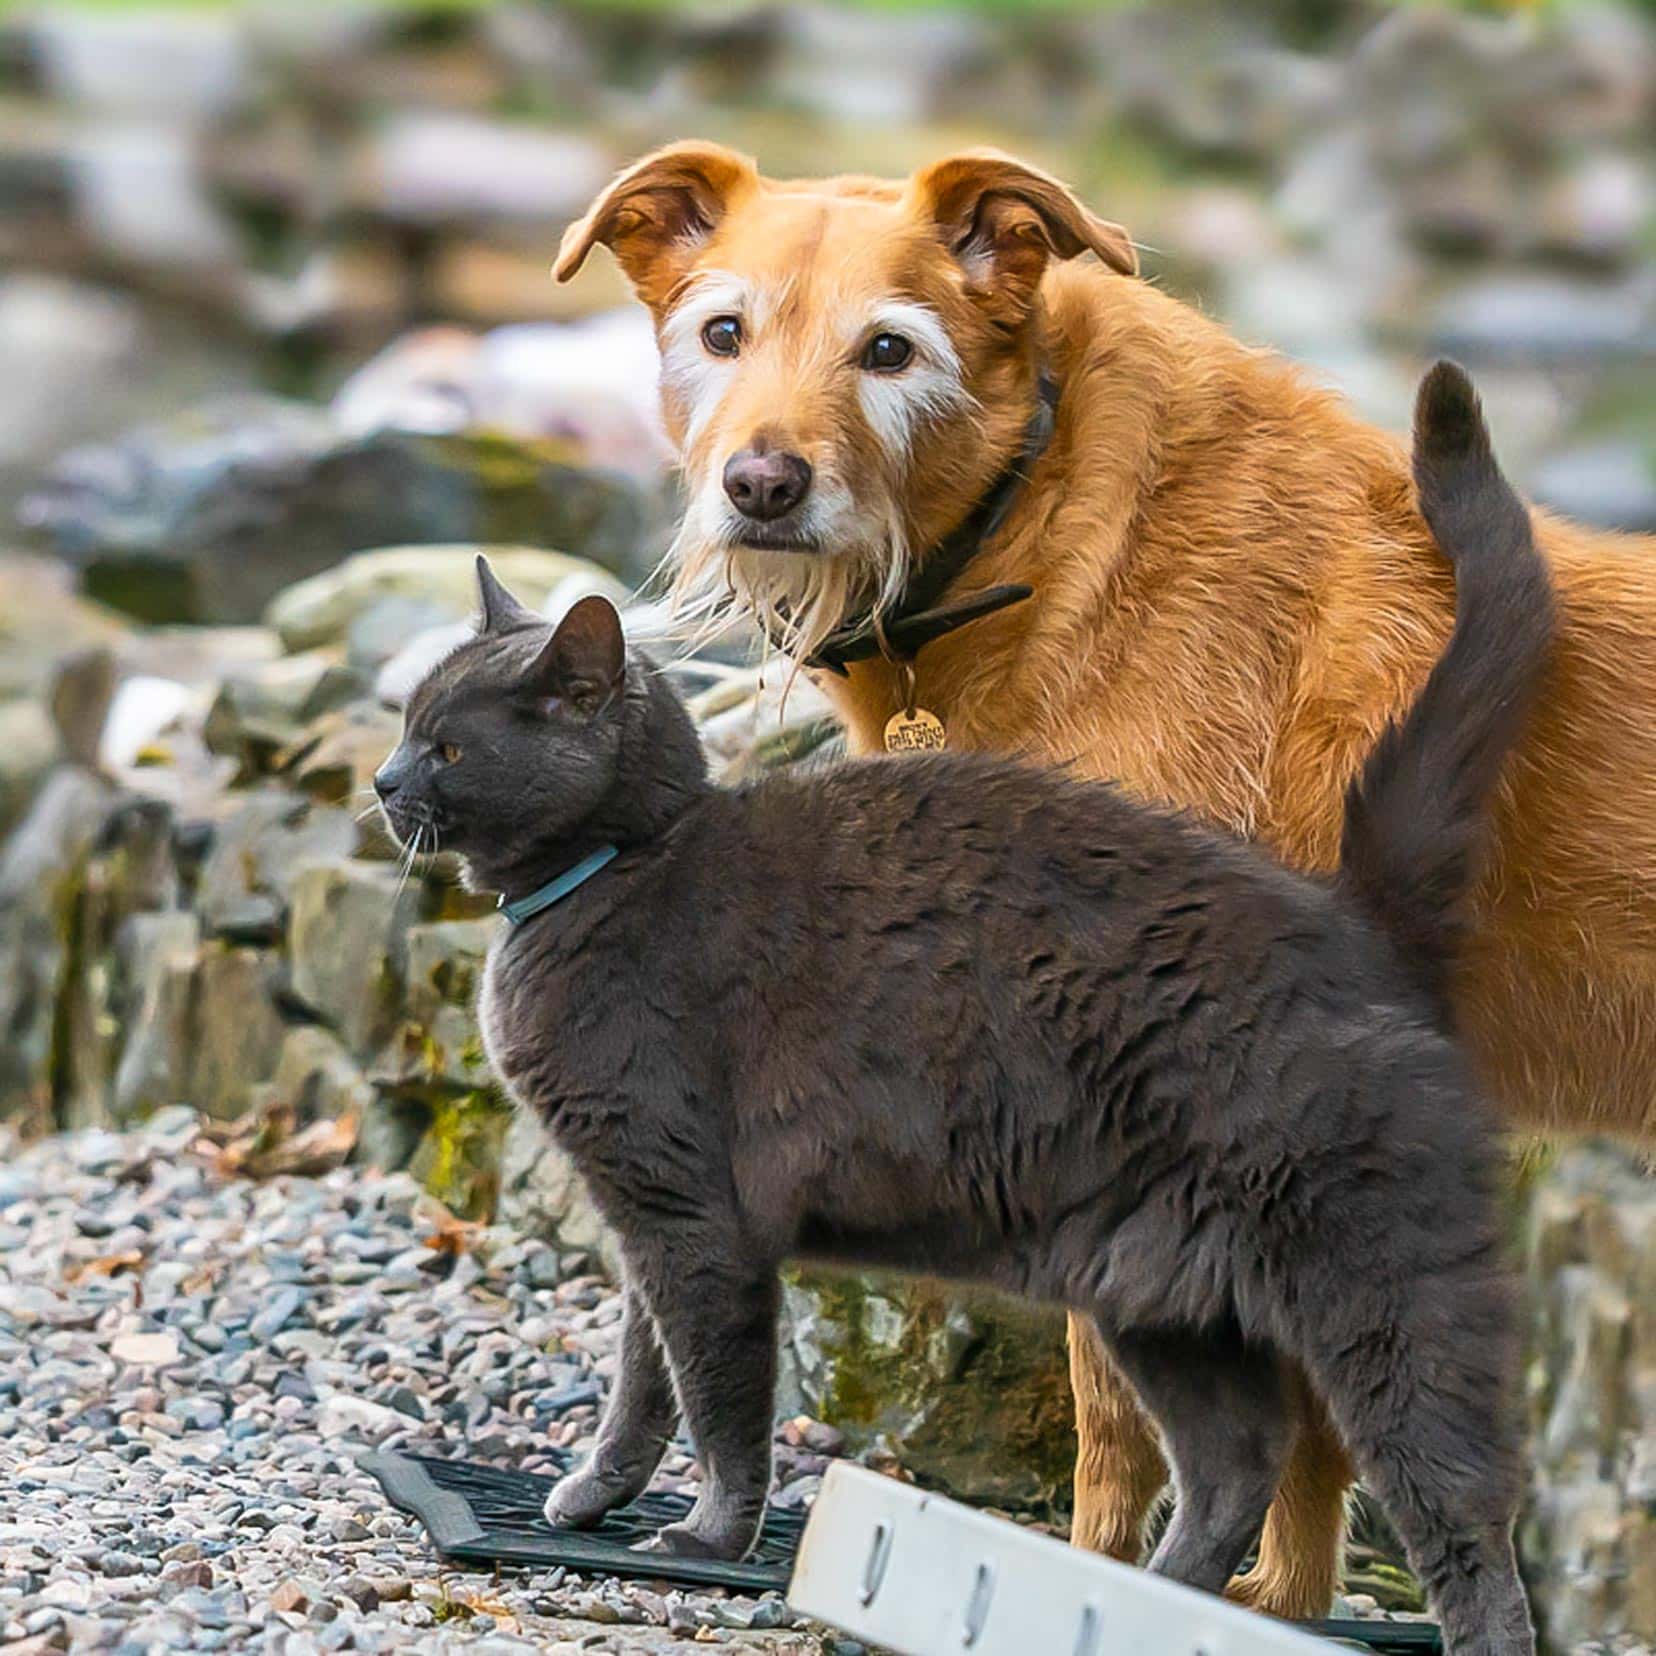 Brown rusty coloured dog stood beside a grey cat